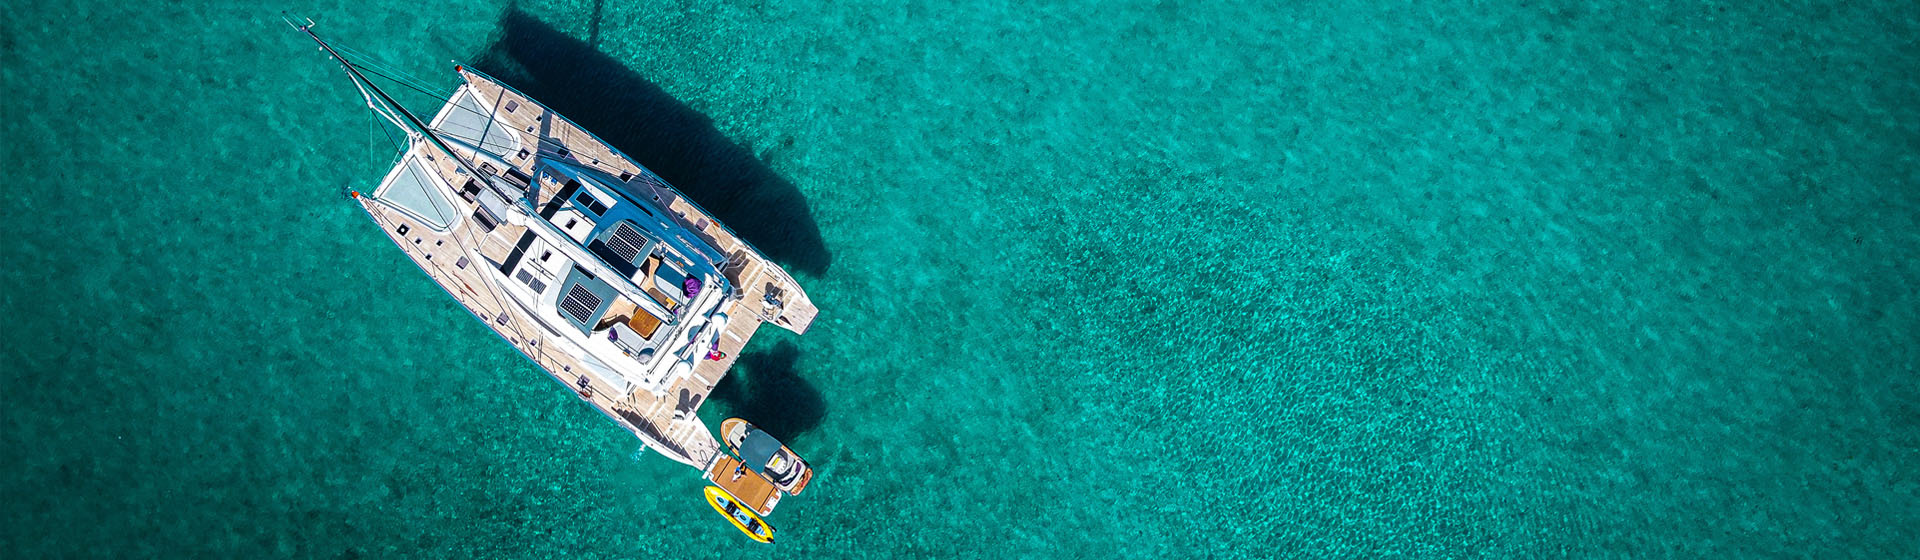 Overhead view of the Privilège Serie 740 Luxury catamaran on calm tropical blue water